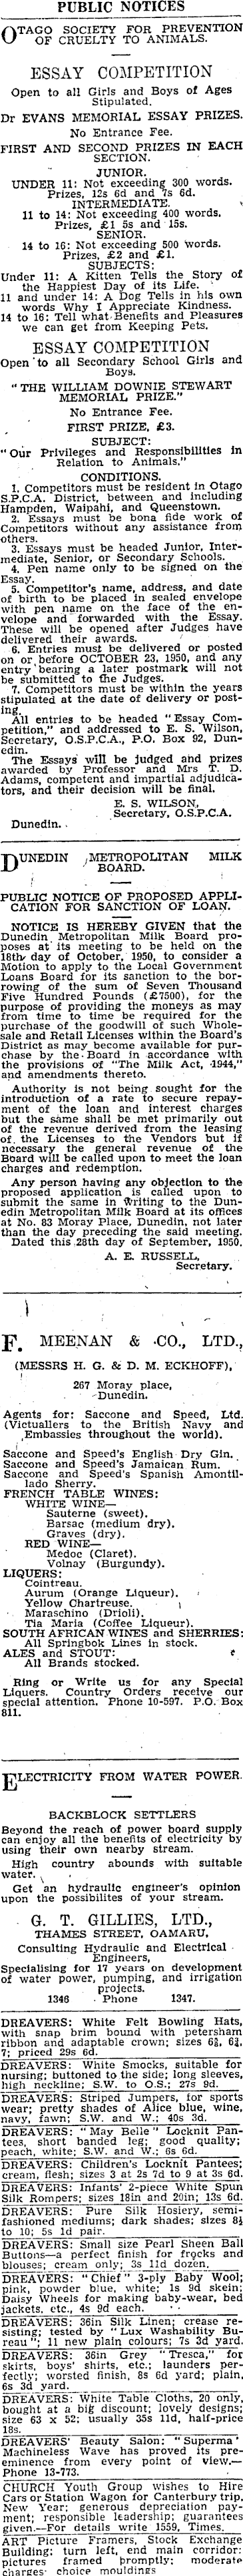 Papers Past | Newspapers | Otago Daily Times | 30 September 1950 | Page 1  Advertisements Column 4